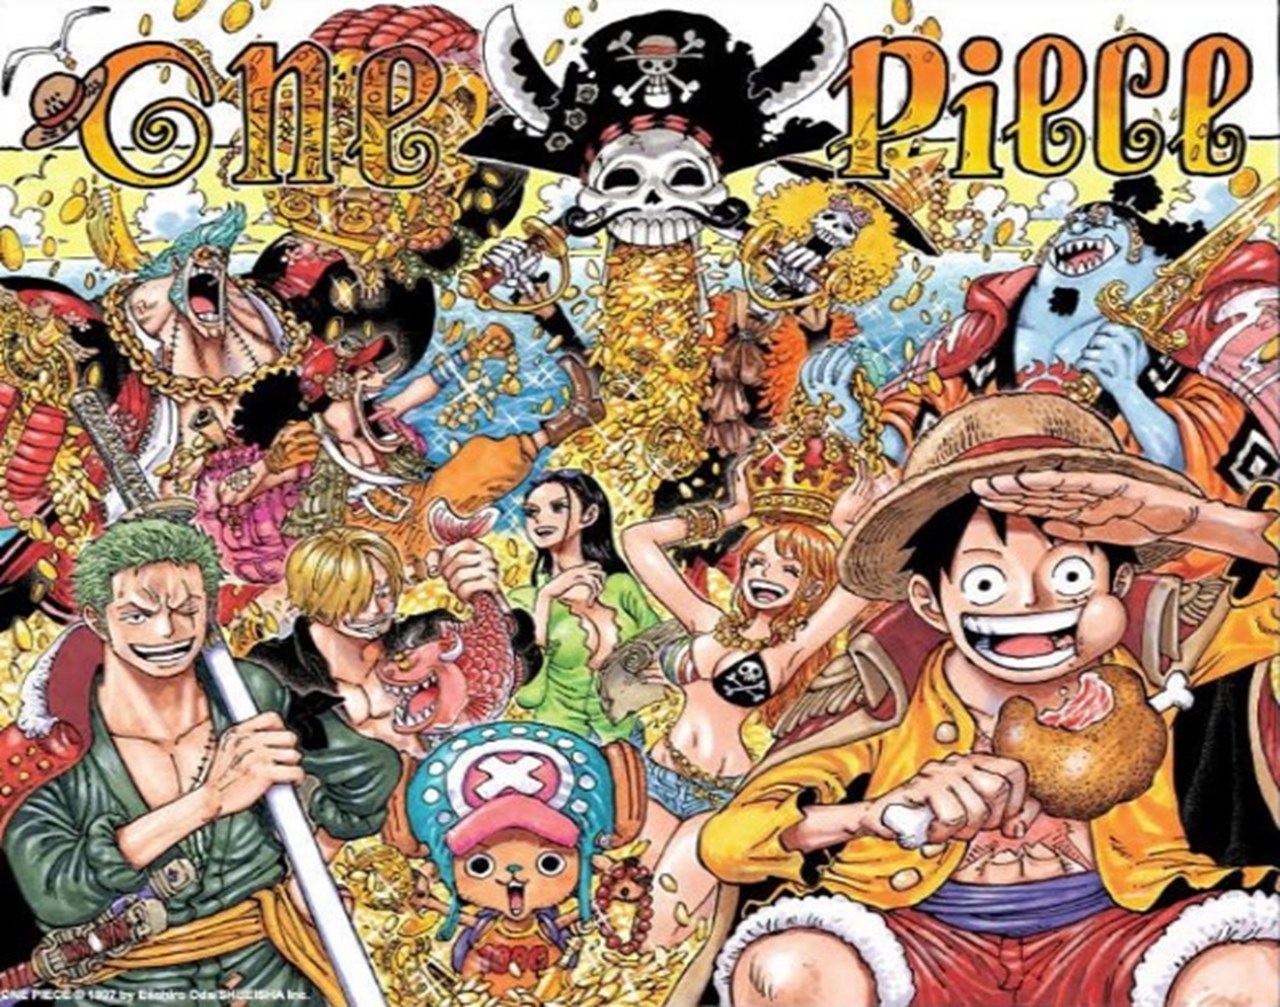 Is Saint Saturn's Devil Fruit the Strongest in One Piece? 5